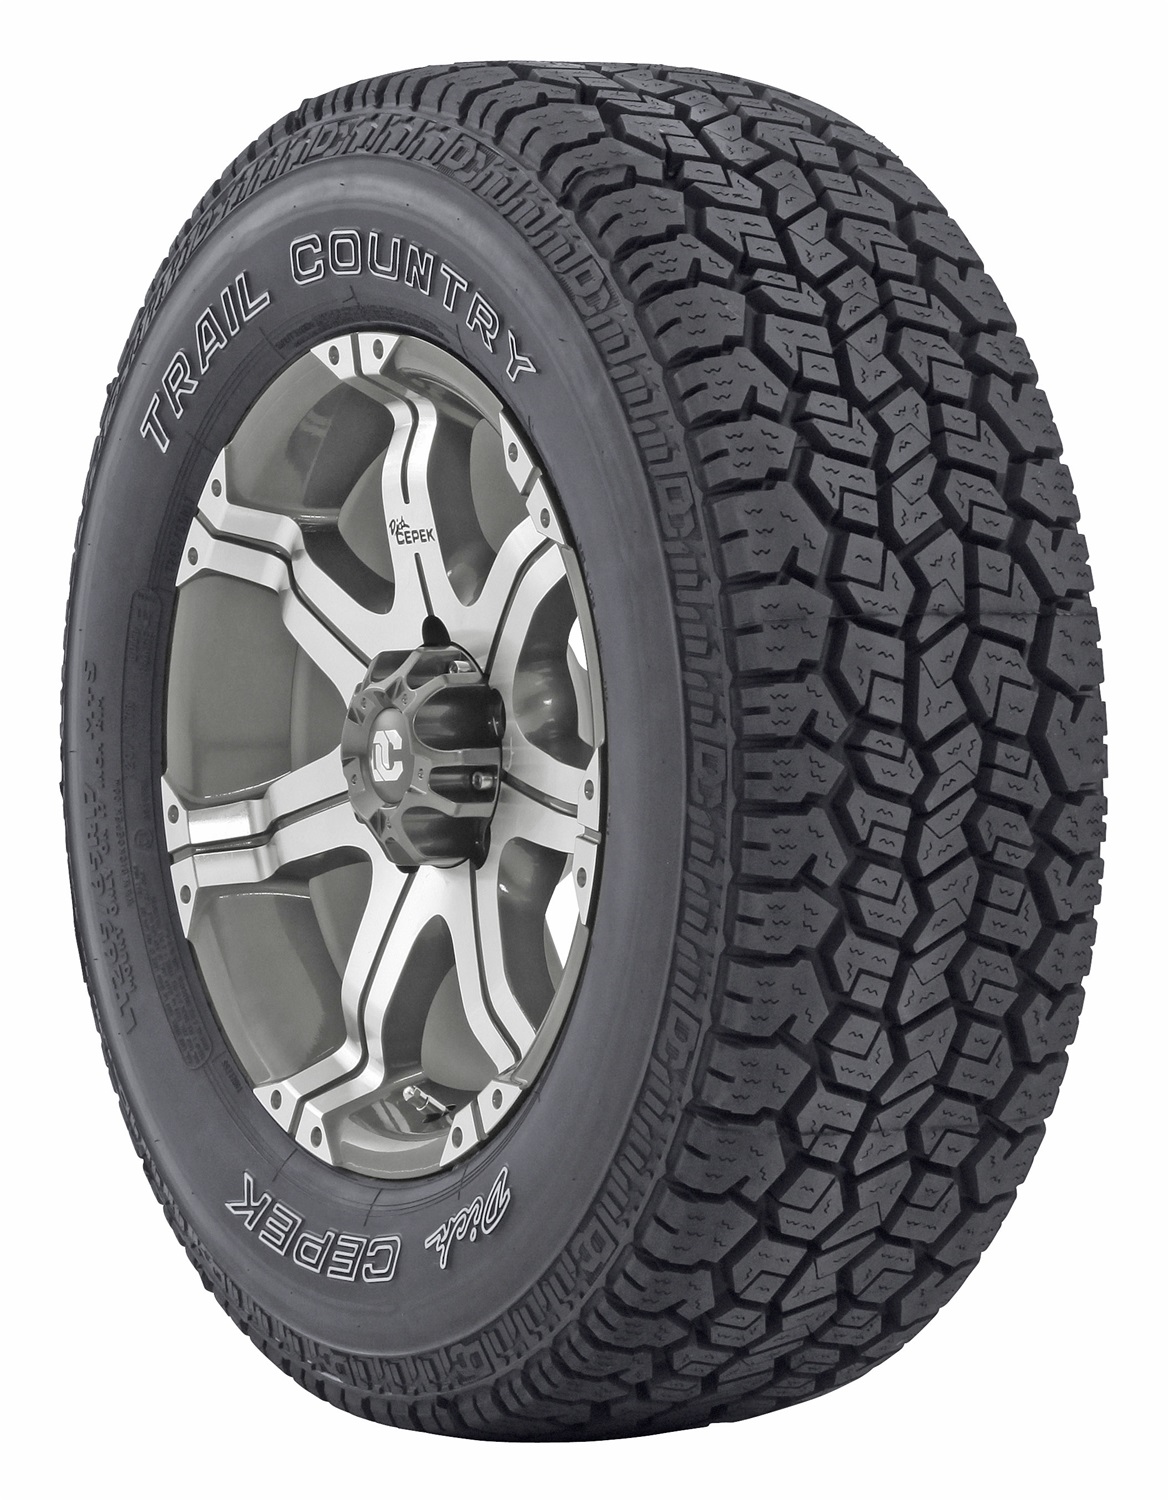 Dick Cepek trail country P265/75R16 116T bsw all-season tire - image 1 of 2